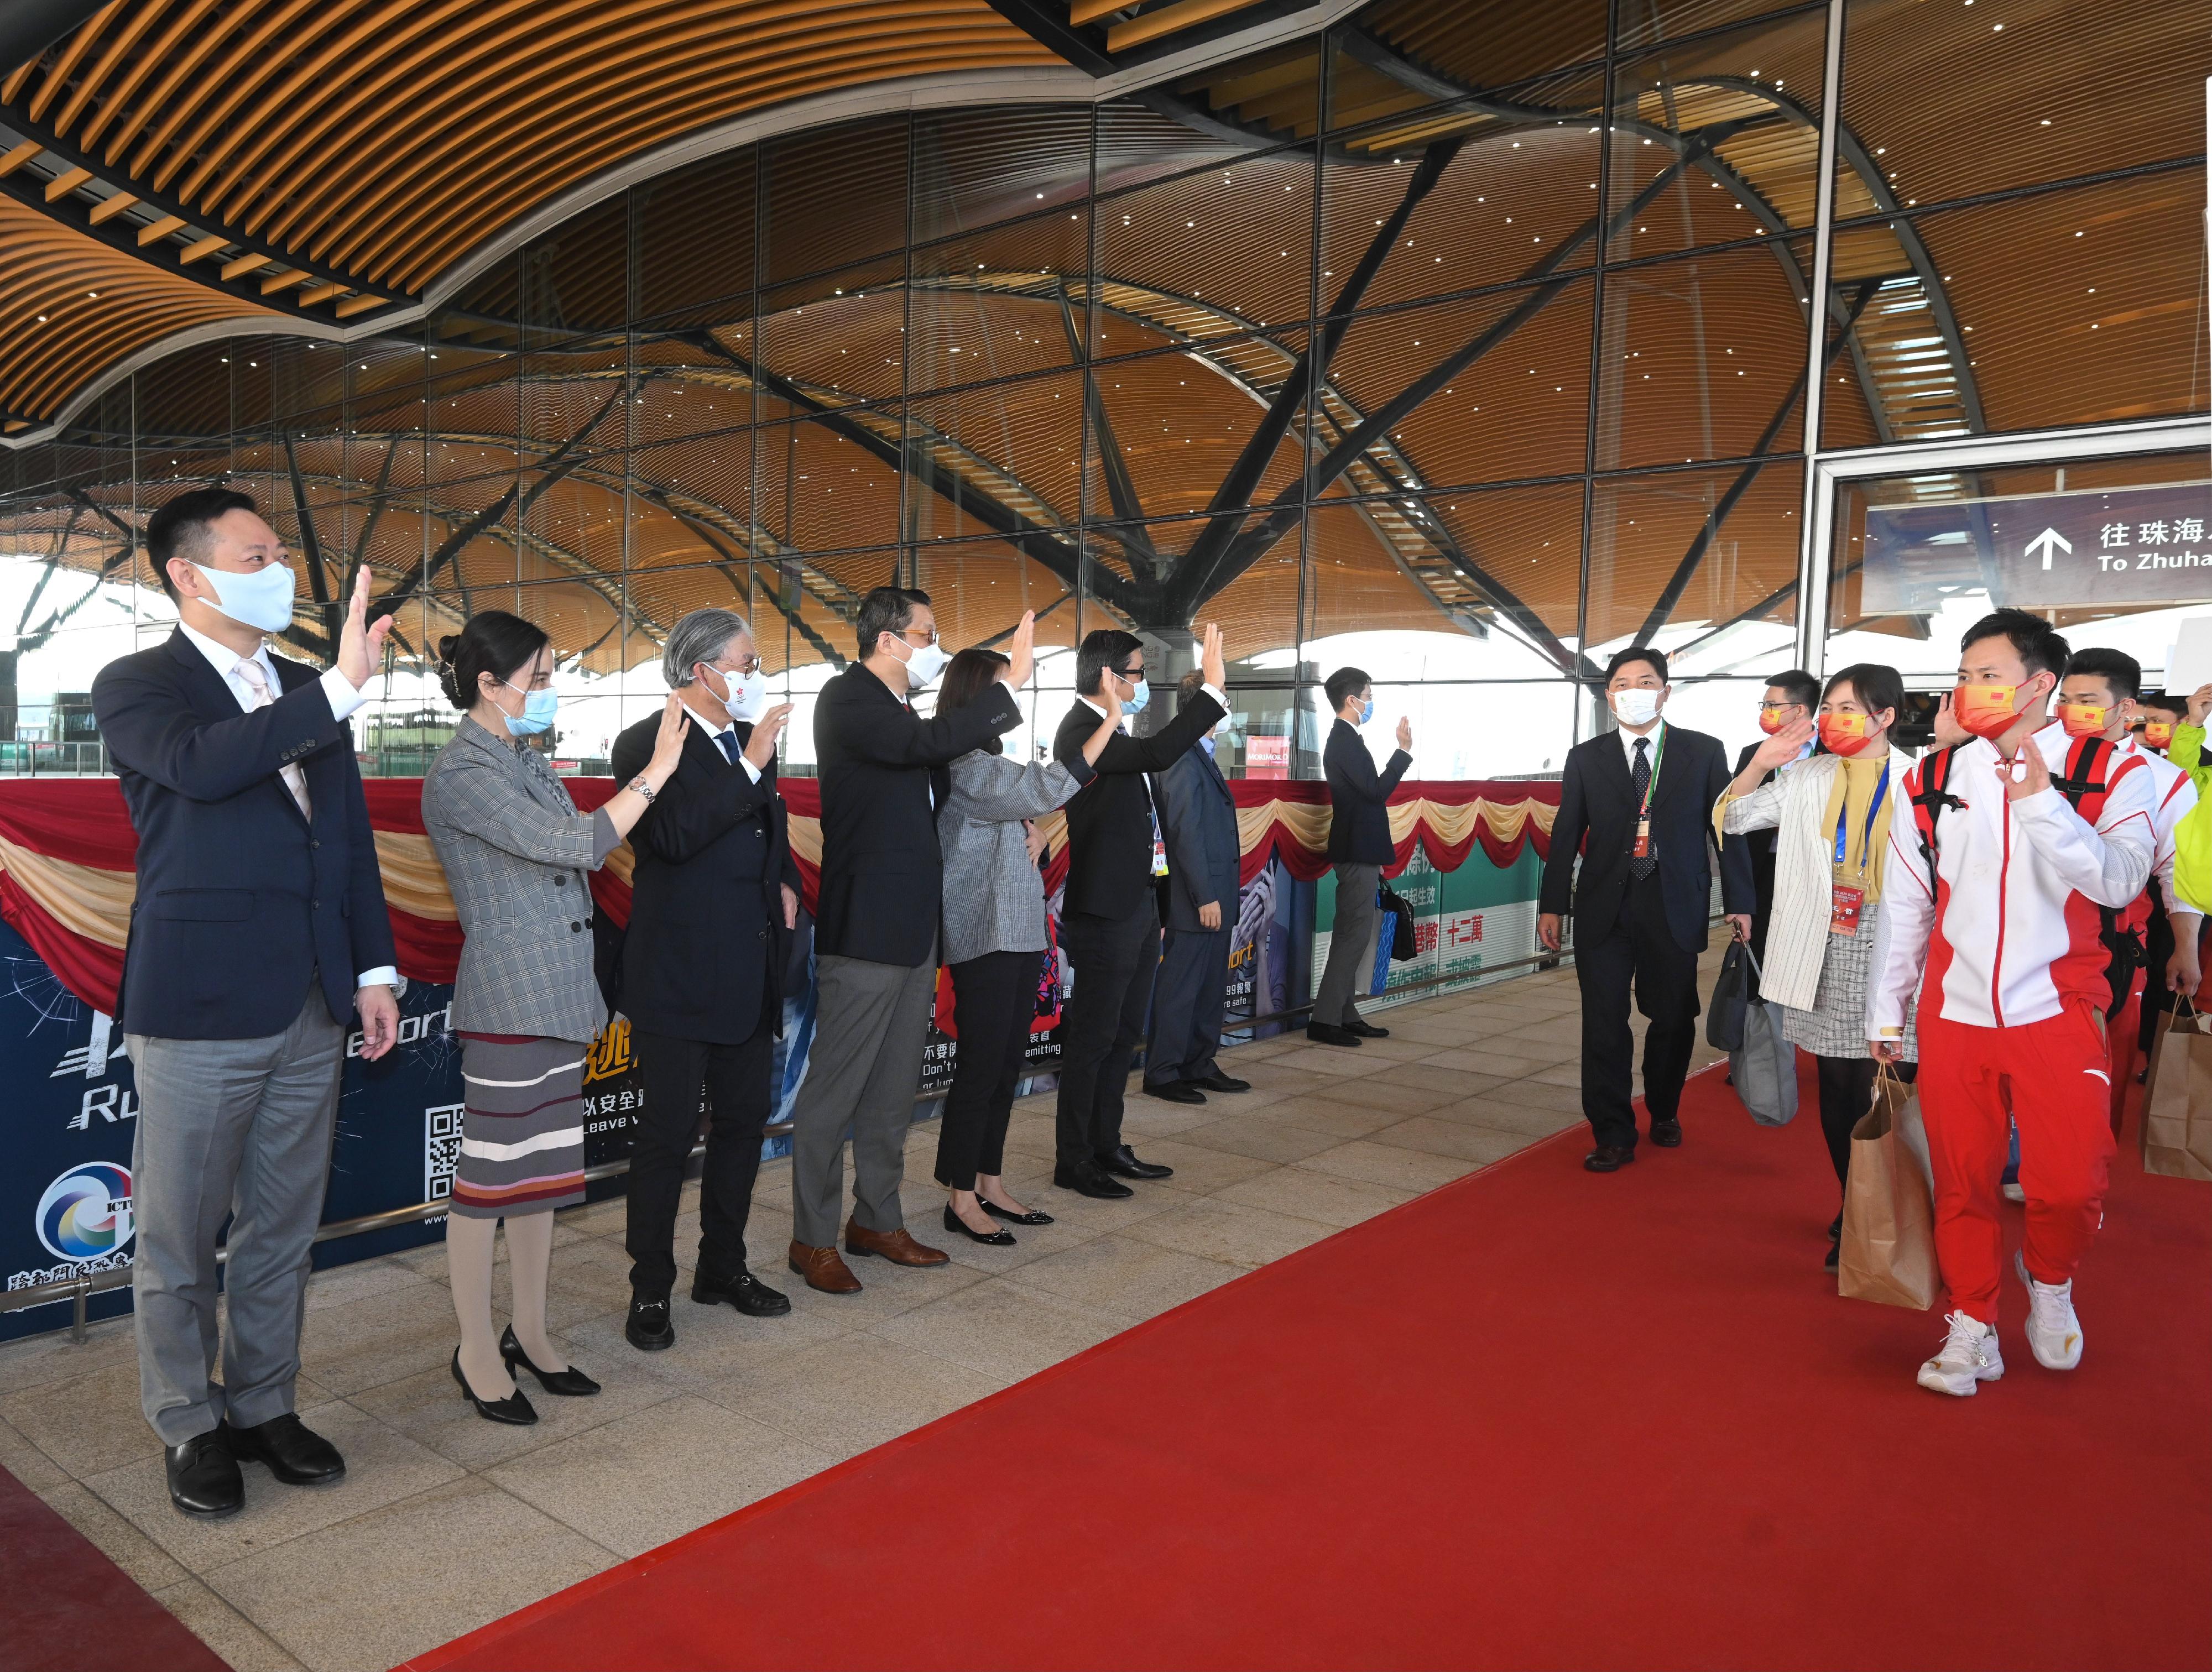 The Tokyo 2020 Olympic Games Mainland Olympians Delegation today (December 5) concluded visit in Hong Kong. Photo shows the Secretary for Home Affairs, Mr Caspar Tsui (first left) waving goodbye to the Delegation.